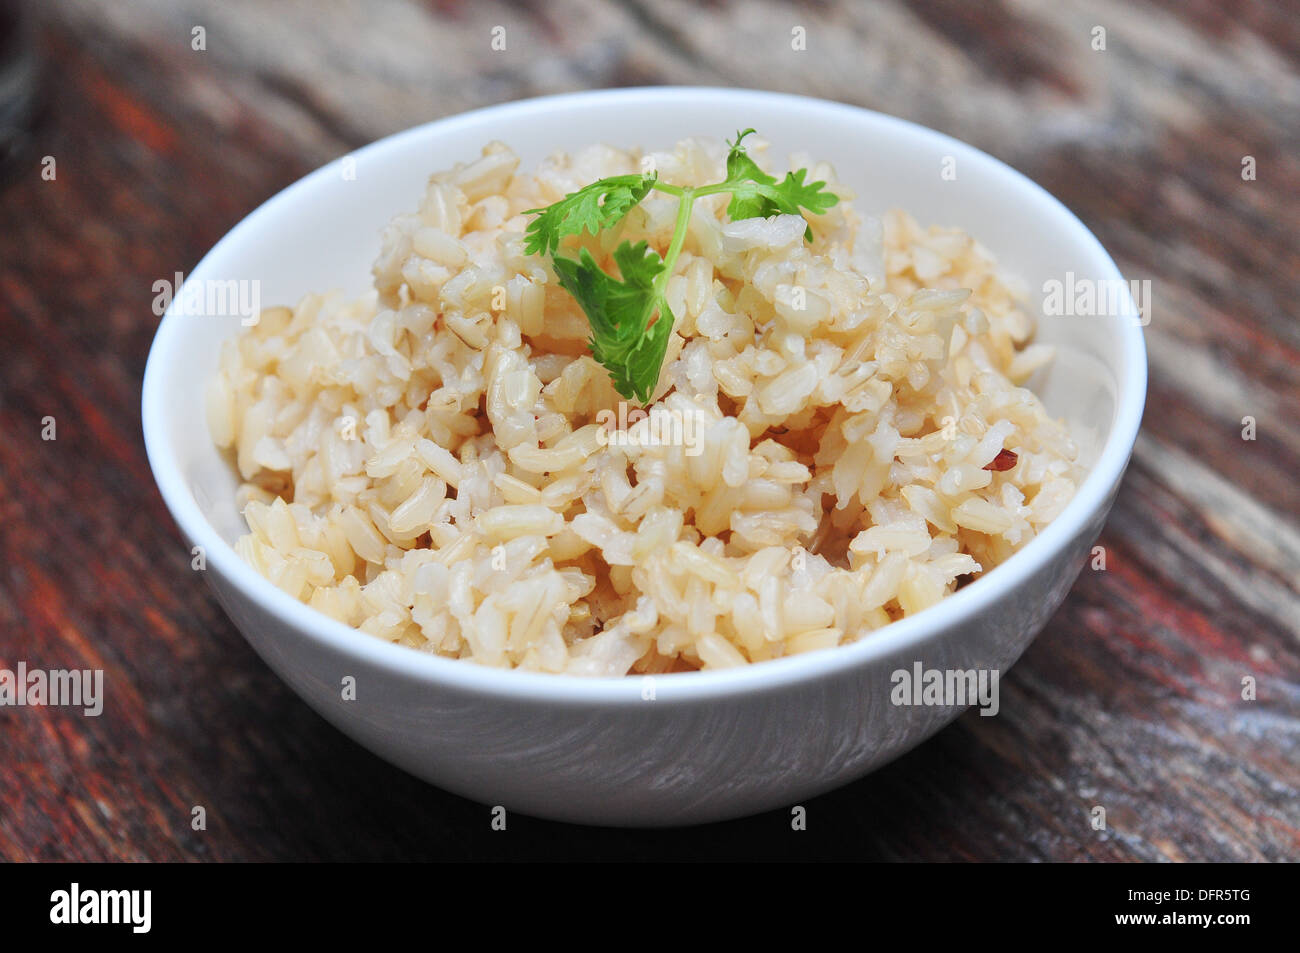 Rice cultivation in Thailand - A bowl of organic rice served in local Thai restaurants Stock Photo